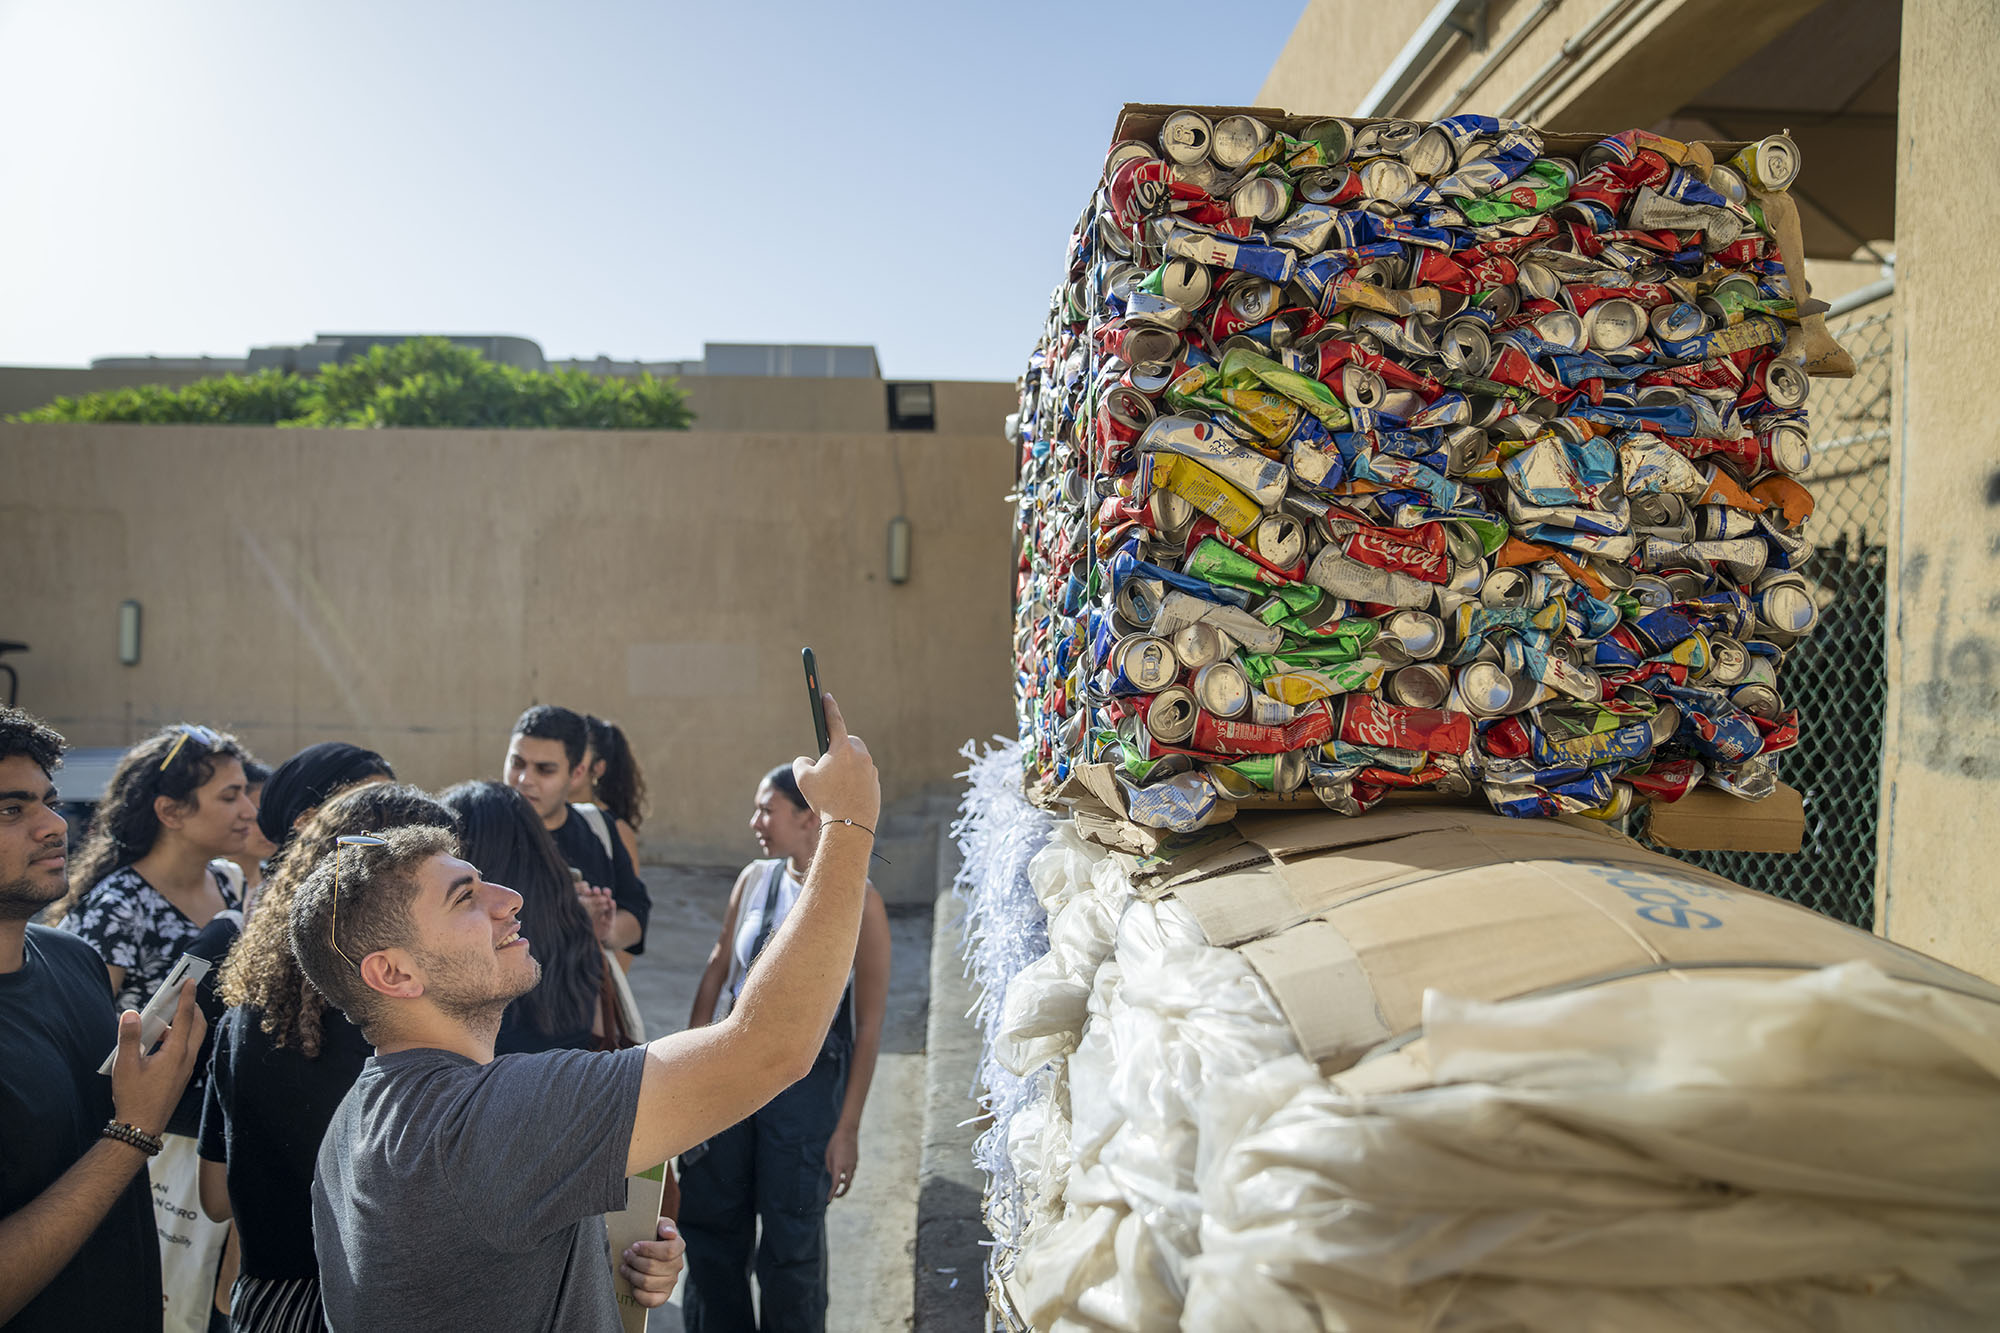 student taking a photo with his phone of the large pile of recycling packed soft drinks pile ready for recyling